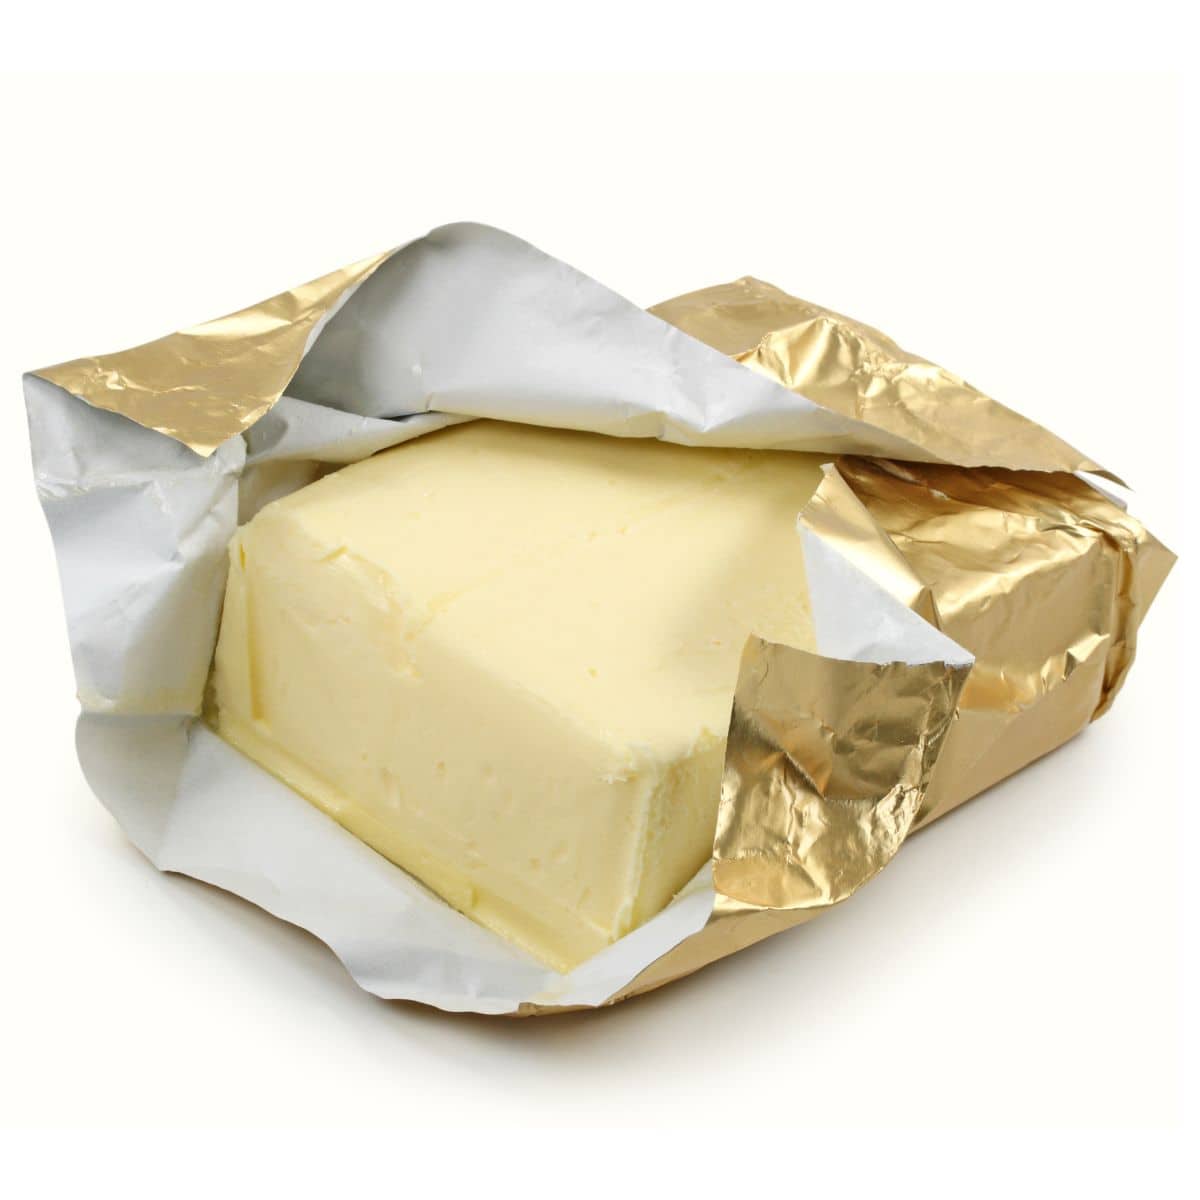 Butter in a gold wrapper on a white background.